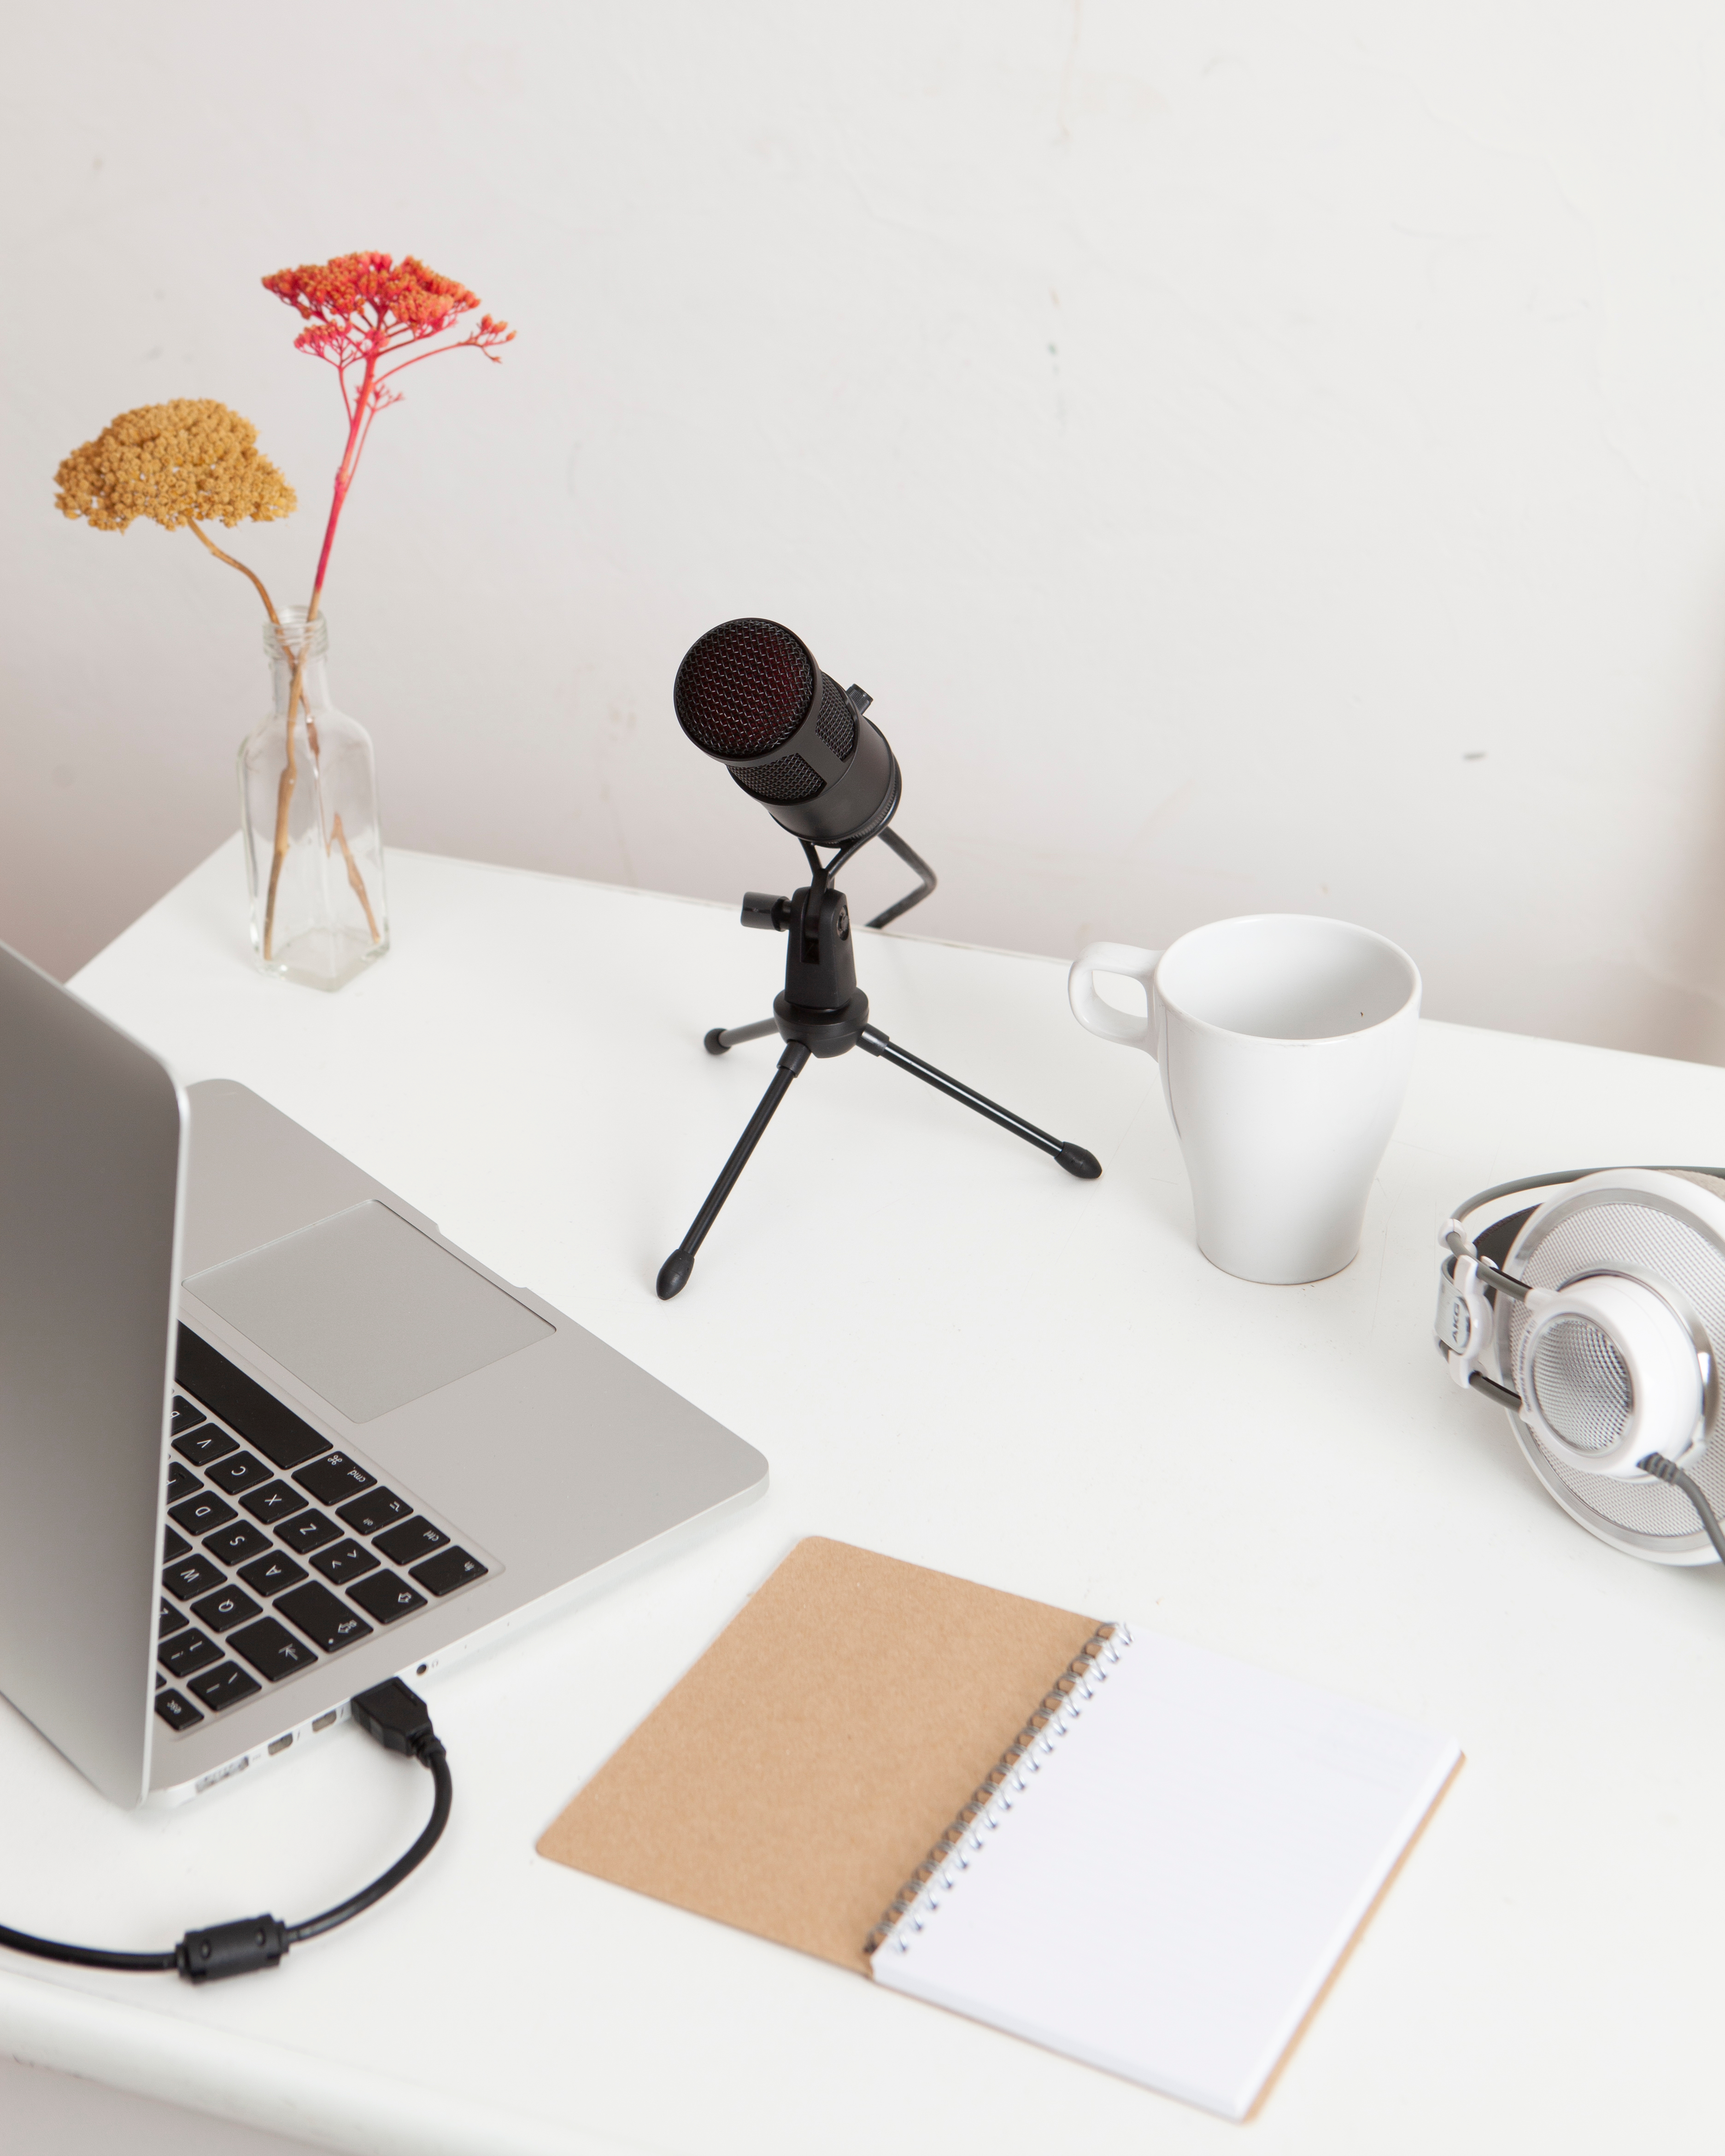 A microphone, laptop, notebook, mug and headphones on a desk.